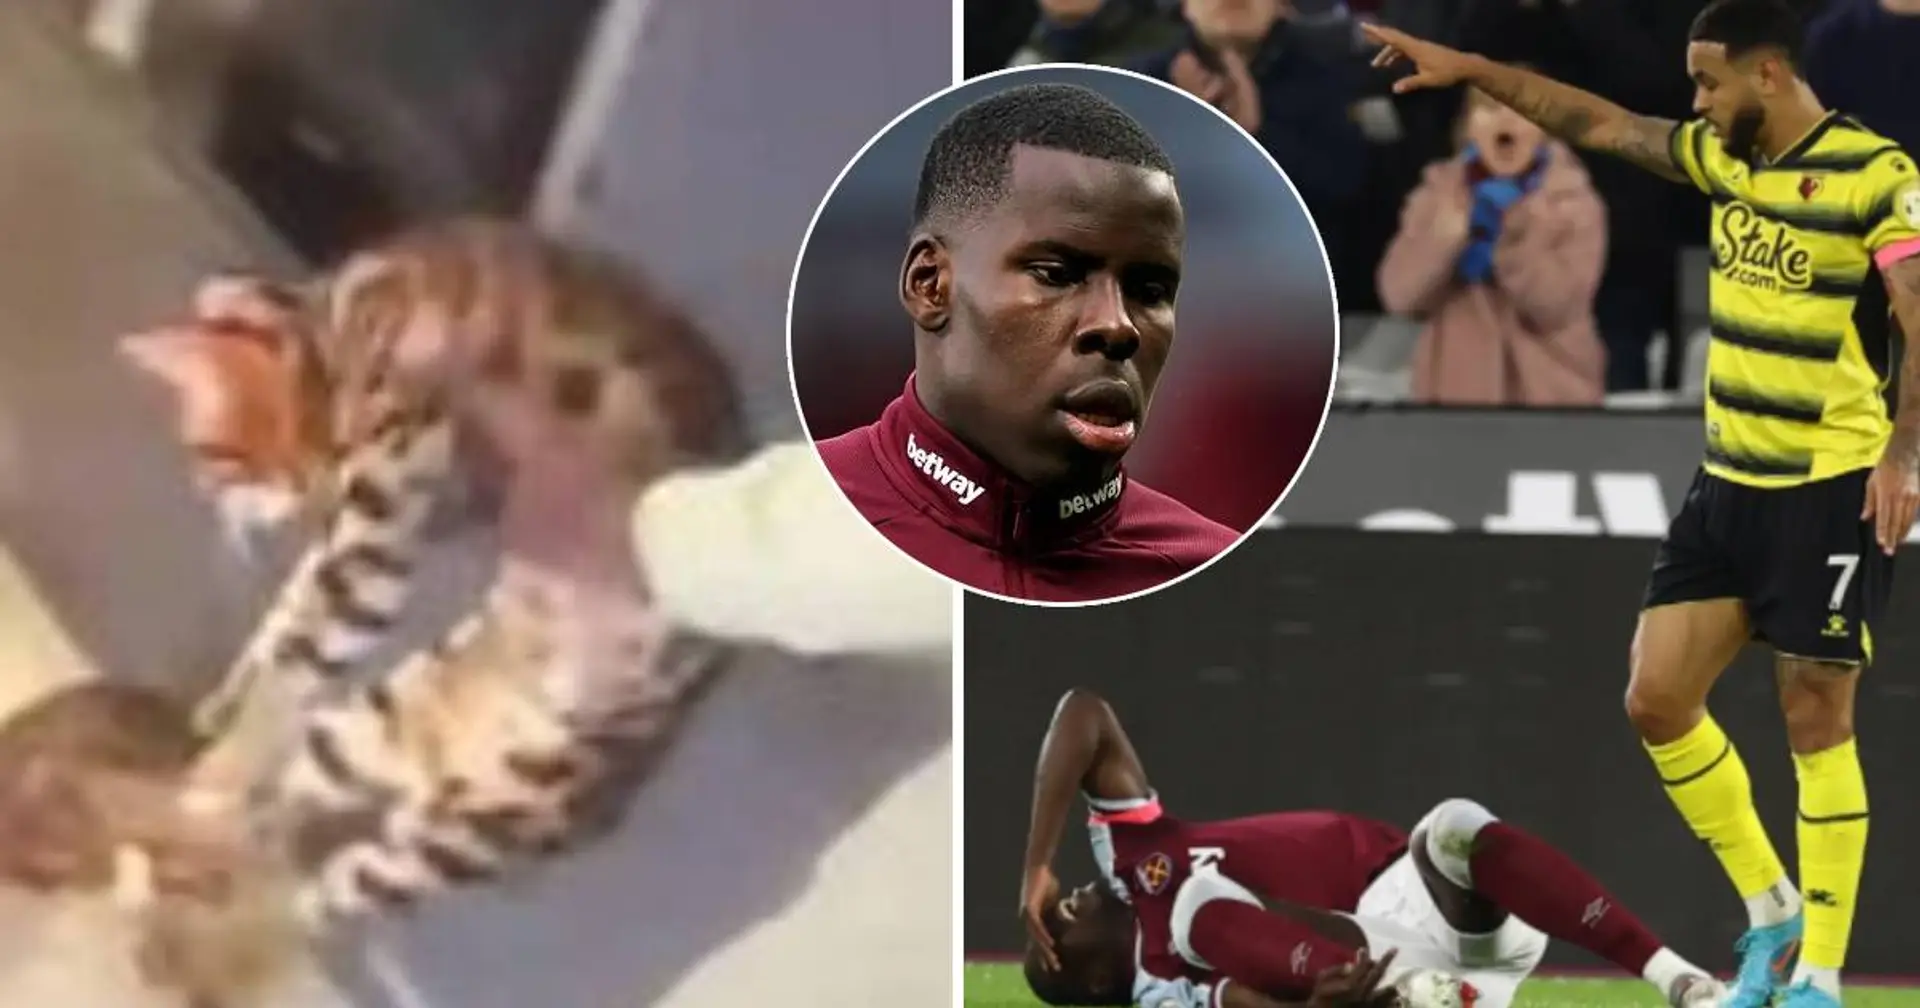 'That's how your cat feels': Fans taunt Kurt Zouma after rough tackle